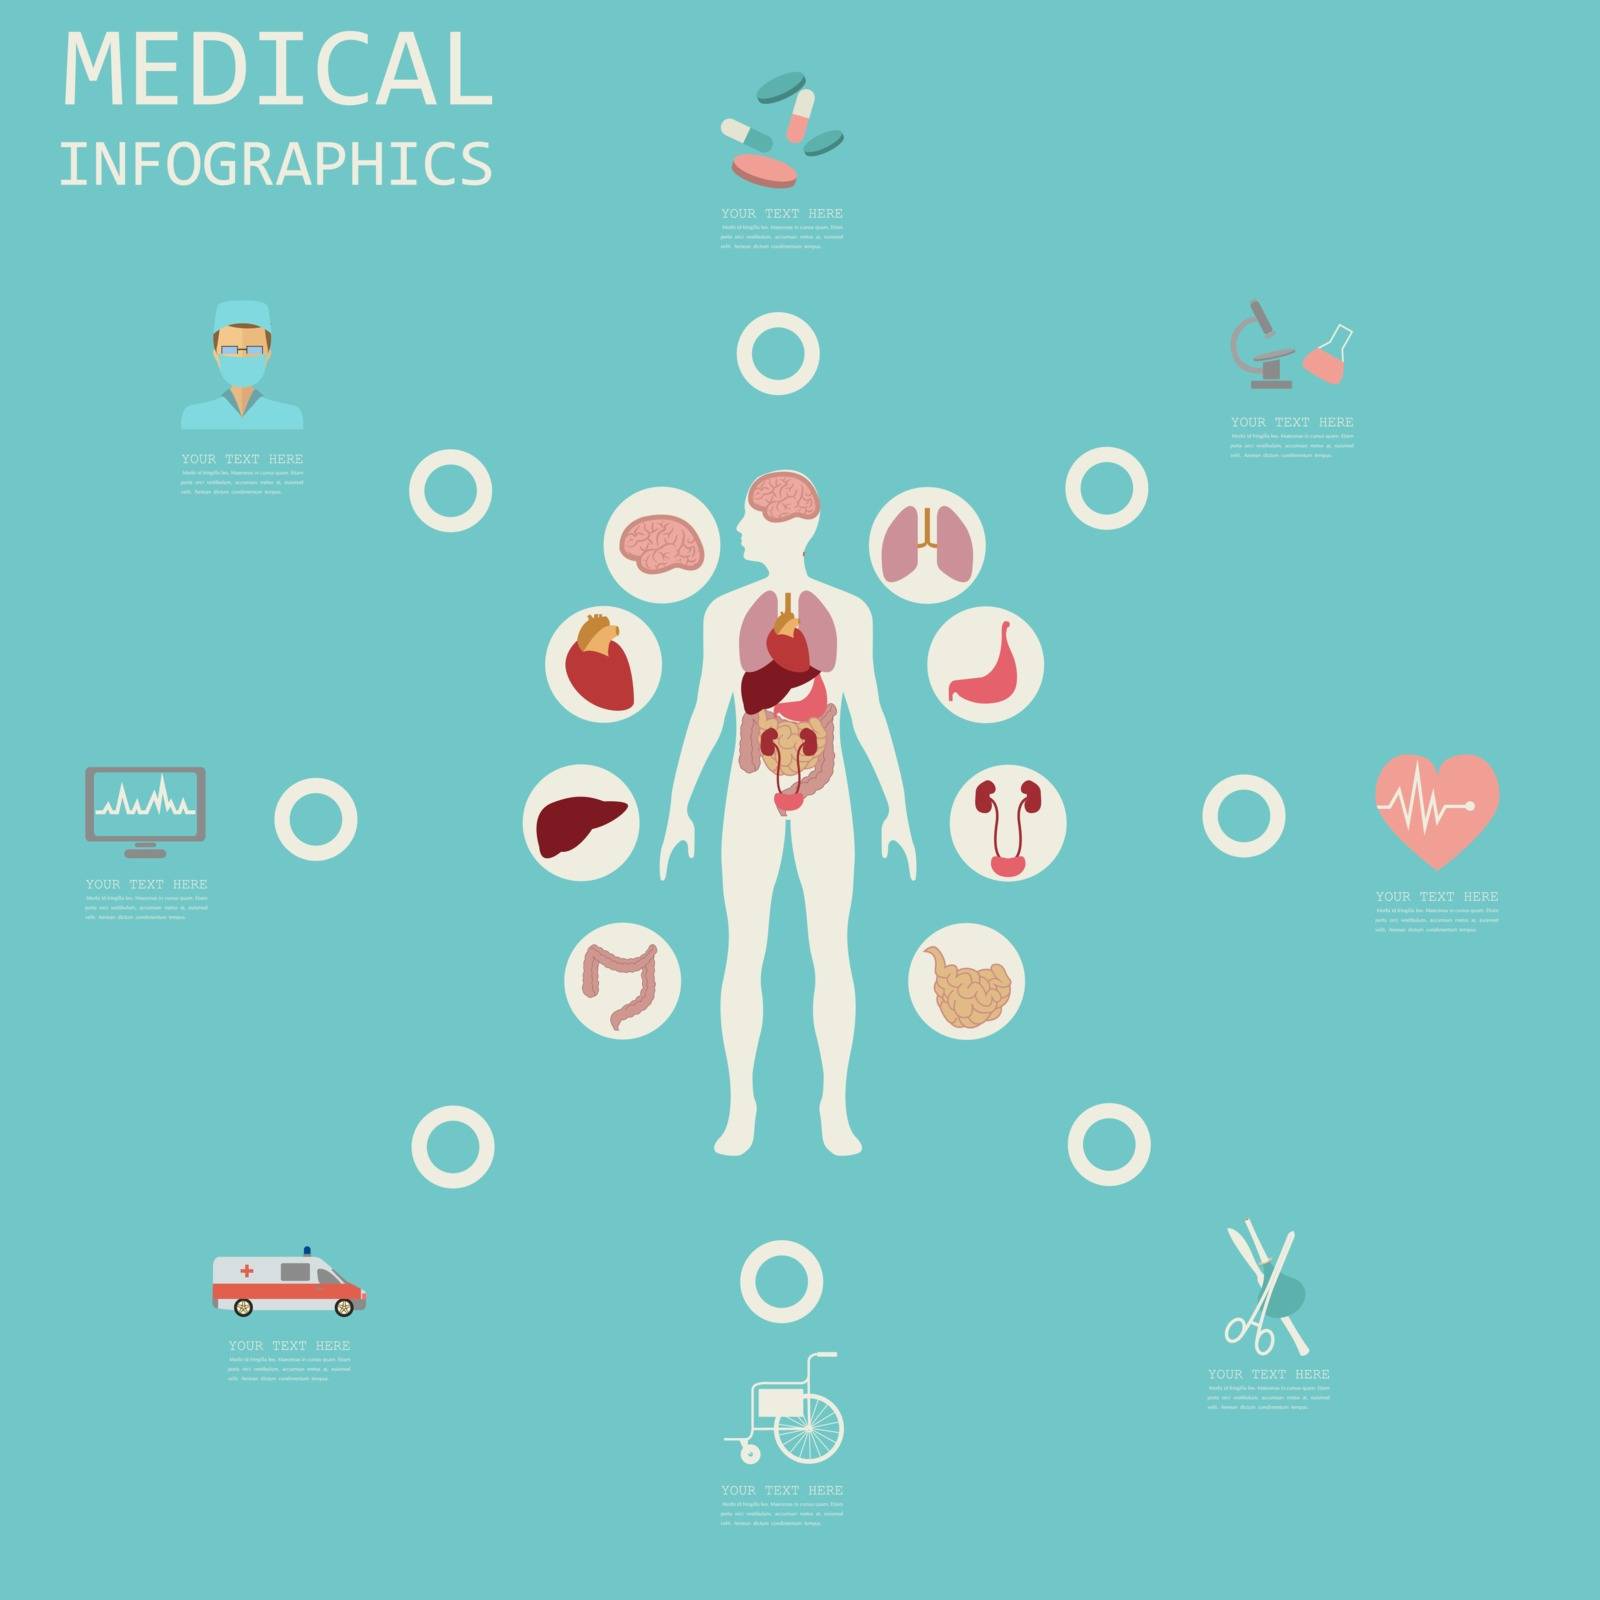 Medical and healthcare infographic, elements for creating infogr by A7880S